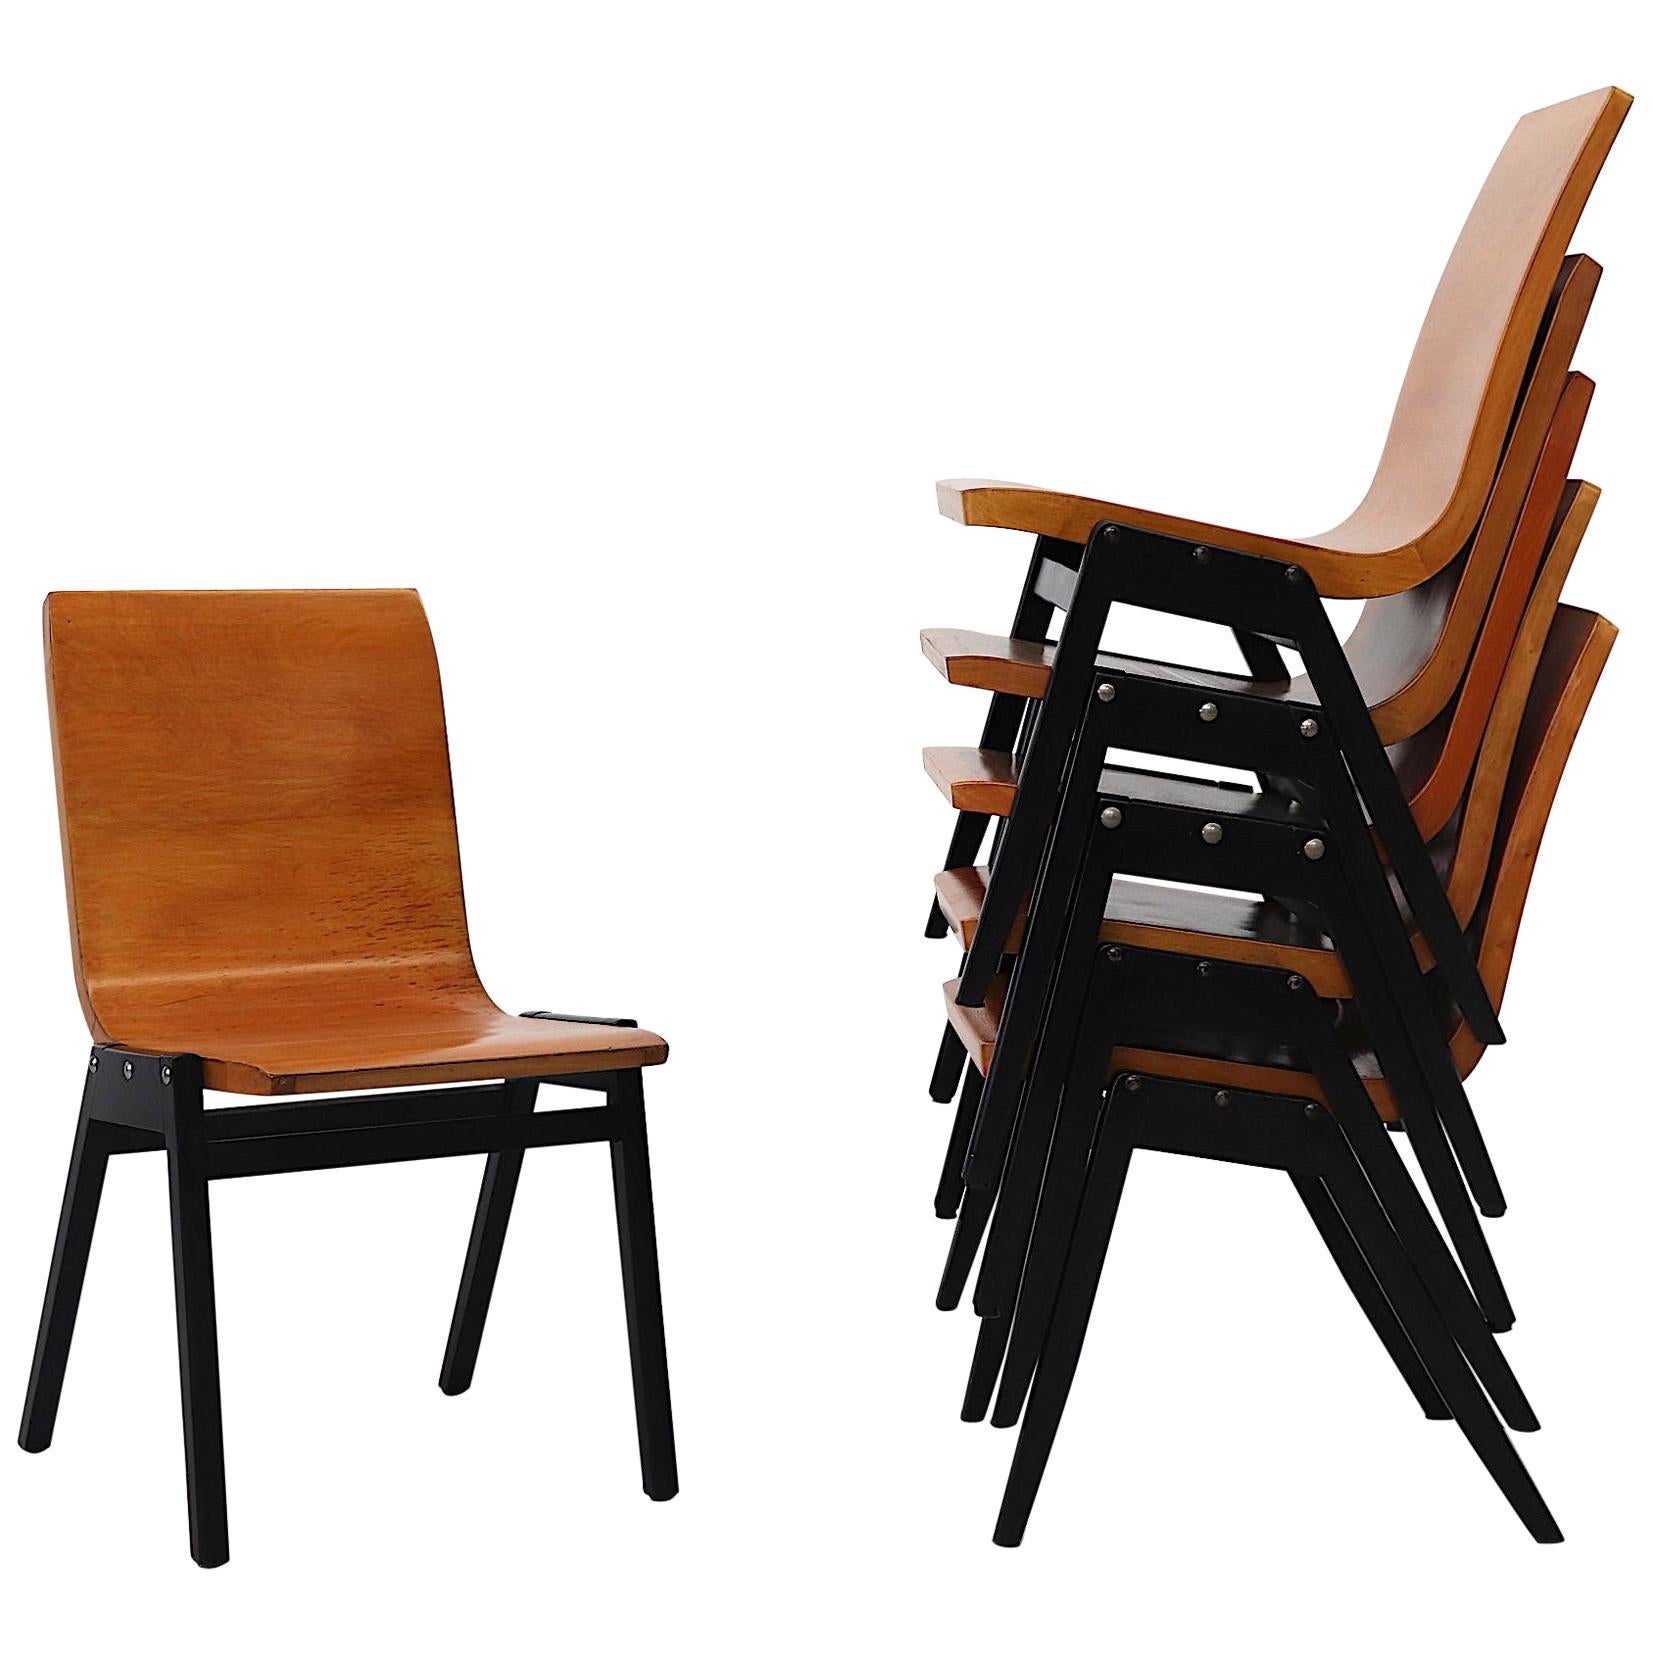 Set of 6 Roland Rainer Plywood Stacking Chairs